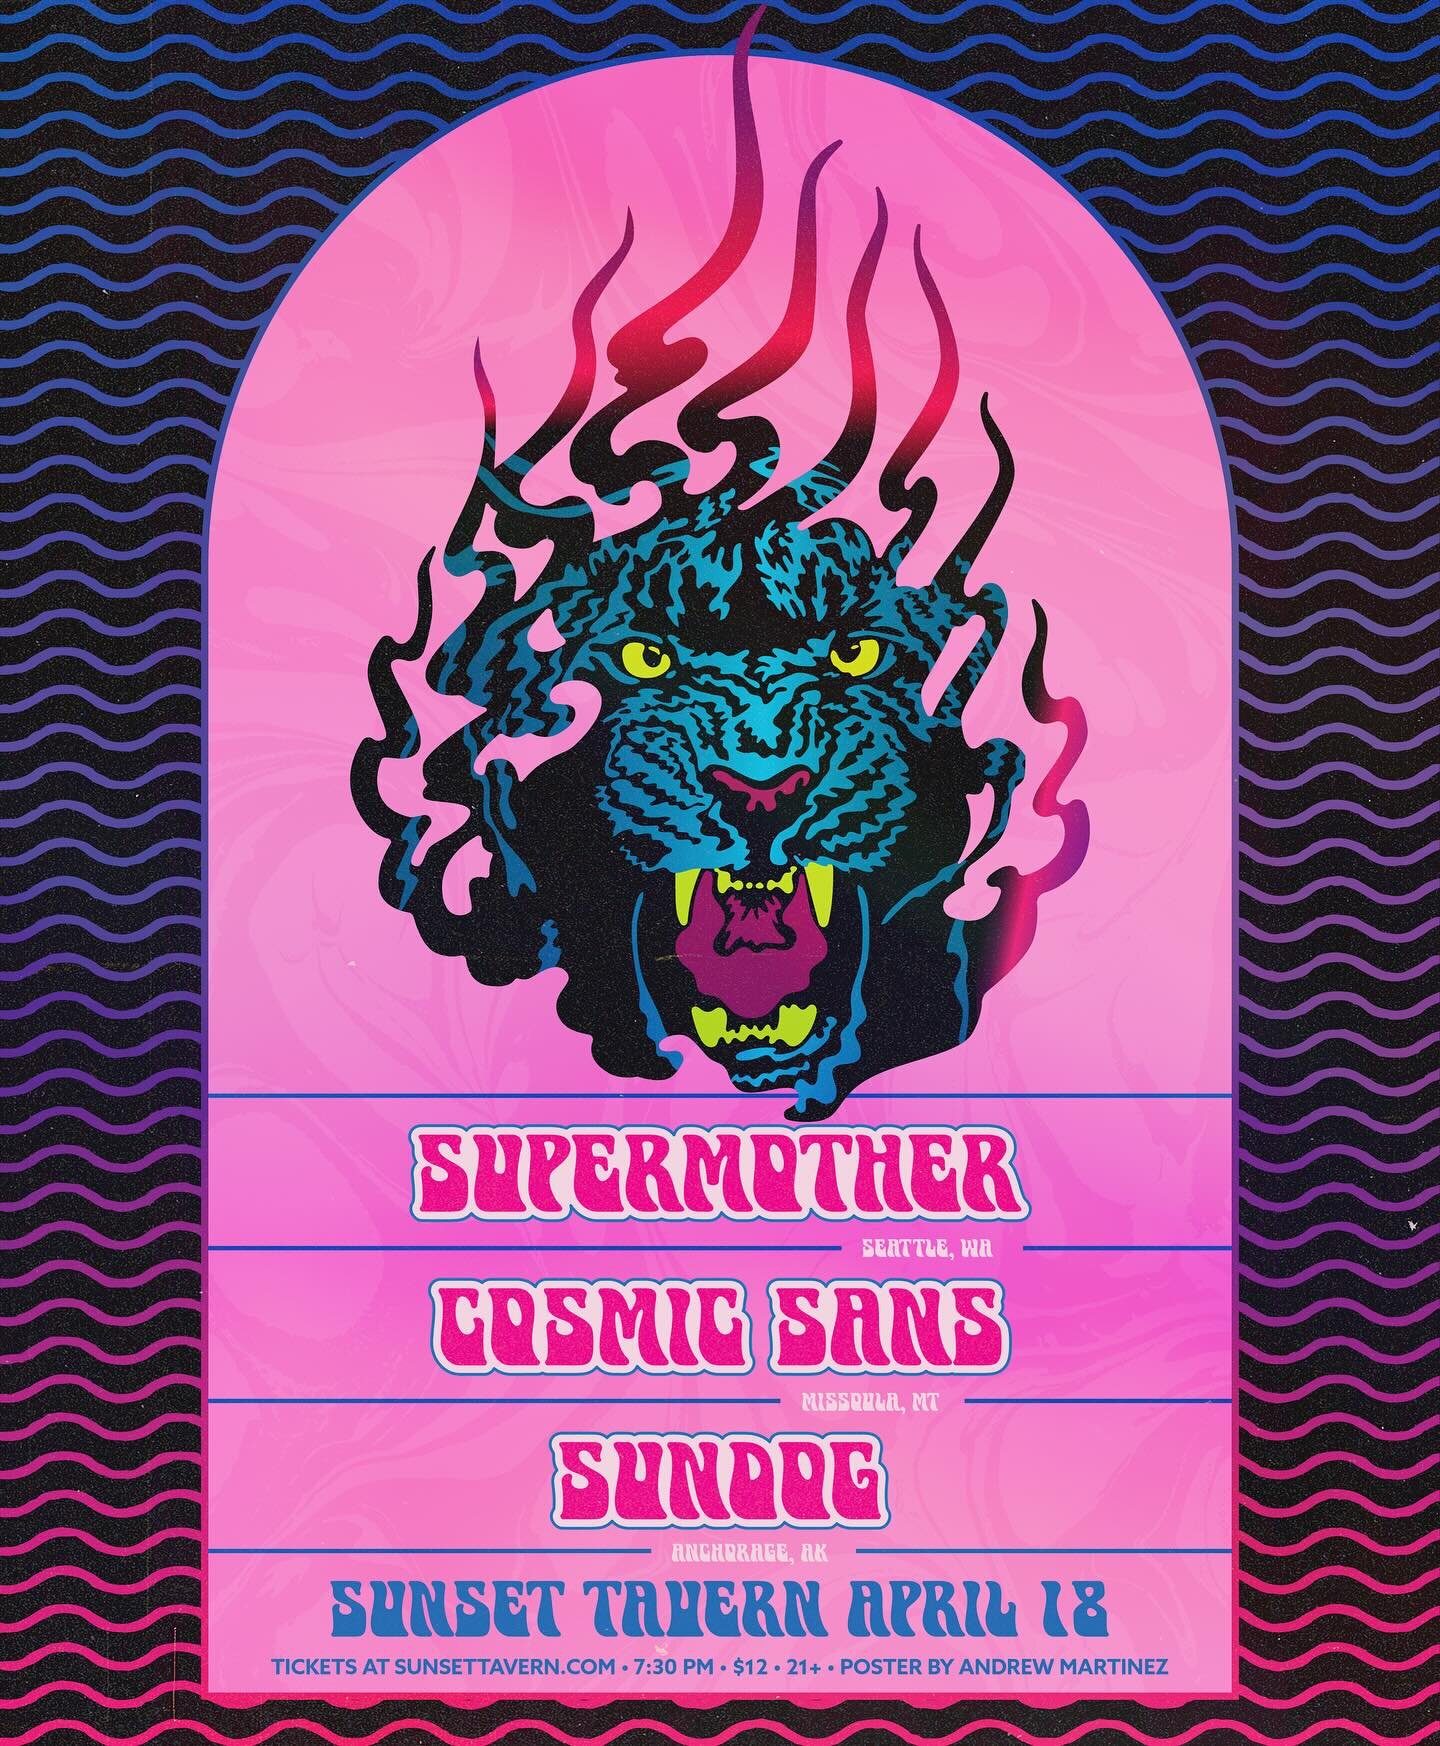 Can&rsquo;t wait for this one! It&rsquo;s gonna be a blast. Were stoked to support our friends in @sundog_ak and @cosmic_sans_band let&rsquo;s gooooo

Poster by @andrewrawrtinez hire him. He&rsquo;s the man!